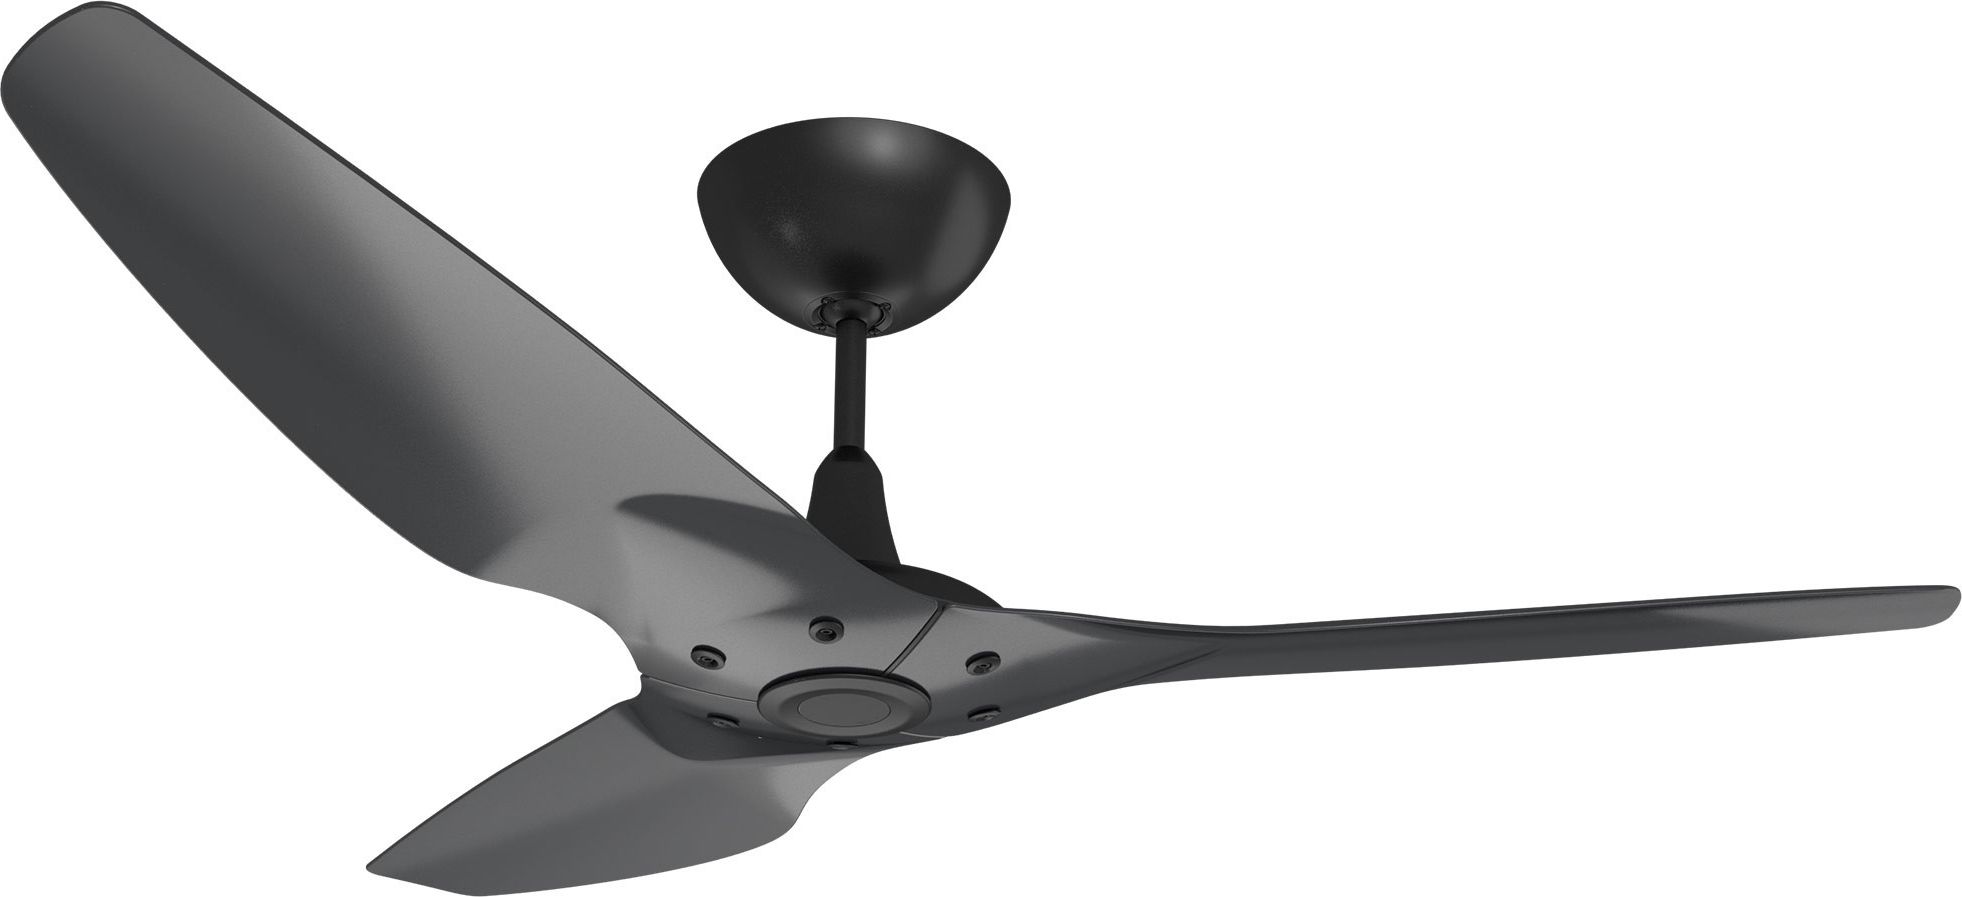 Haiku Outdoor Ceiling Fan: 60", Black Aluminum, Universal Mount With Regard To Most Current Black Outdoor Ceiling Fans (View 8 of 20)